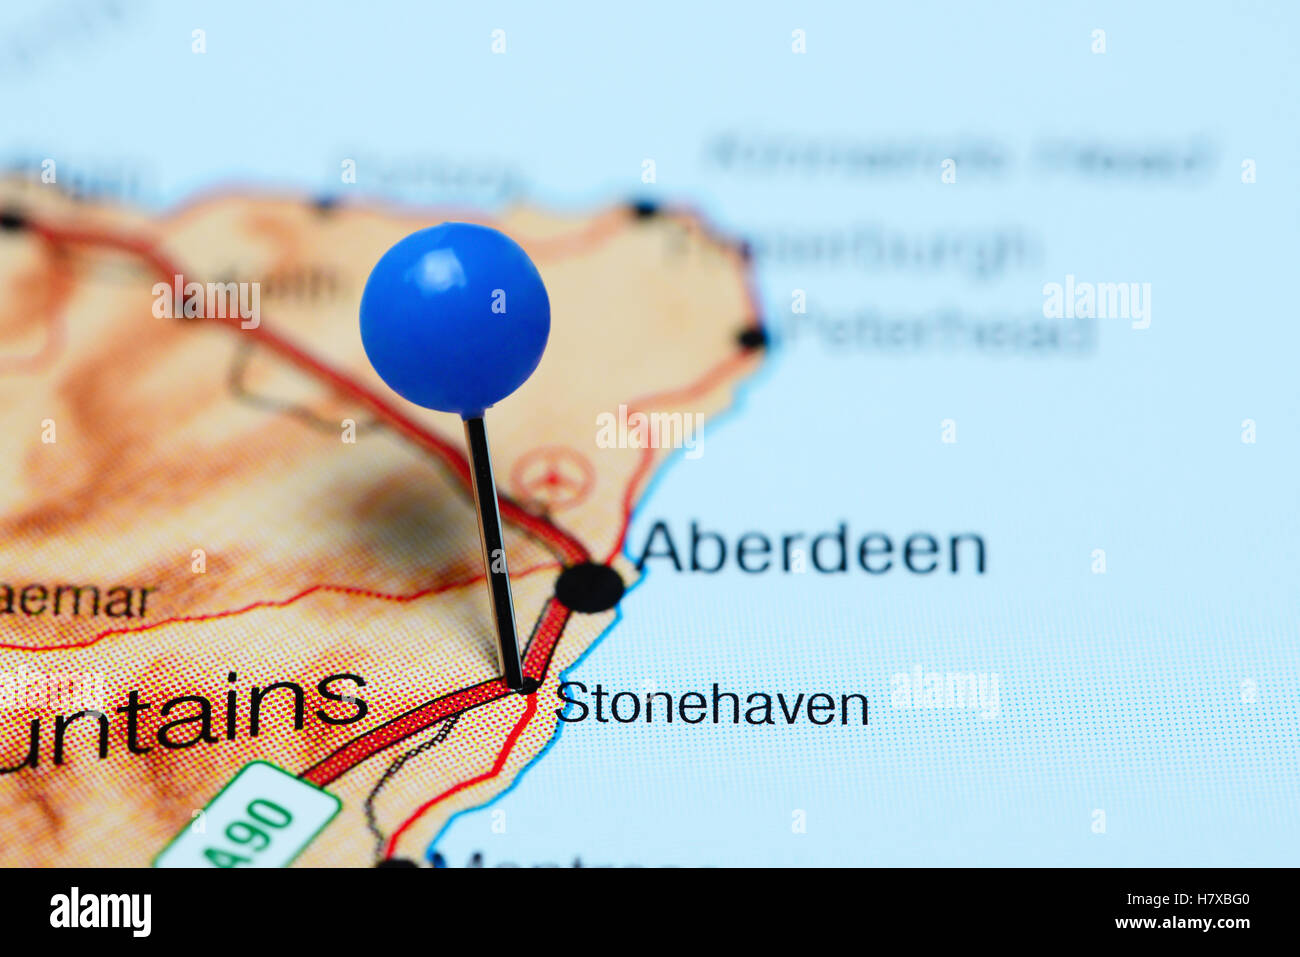 Stonehaven pinned on a map of Scotland Stock Photo